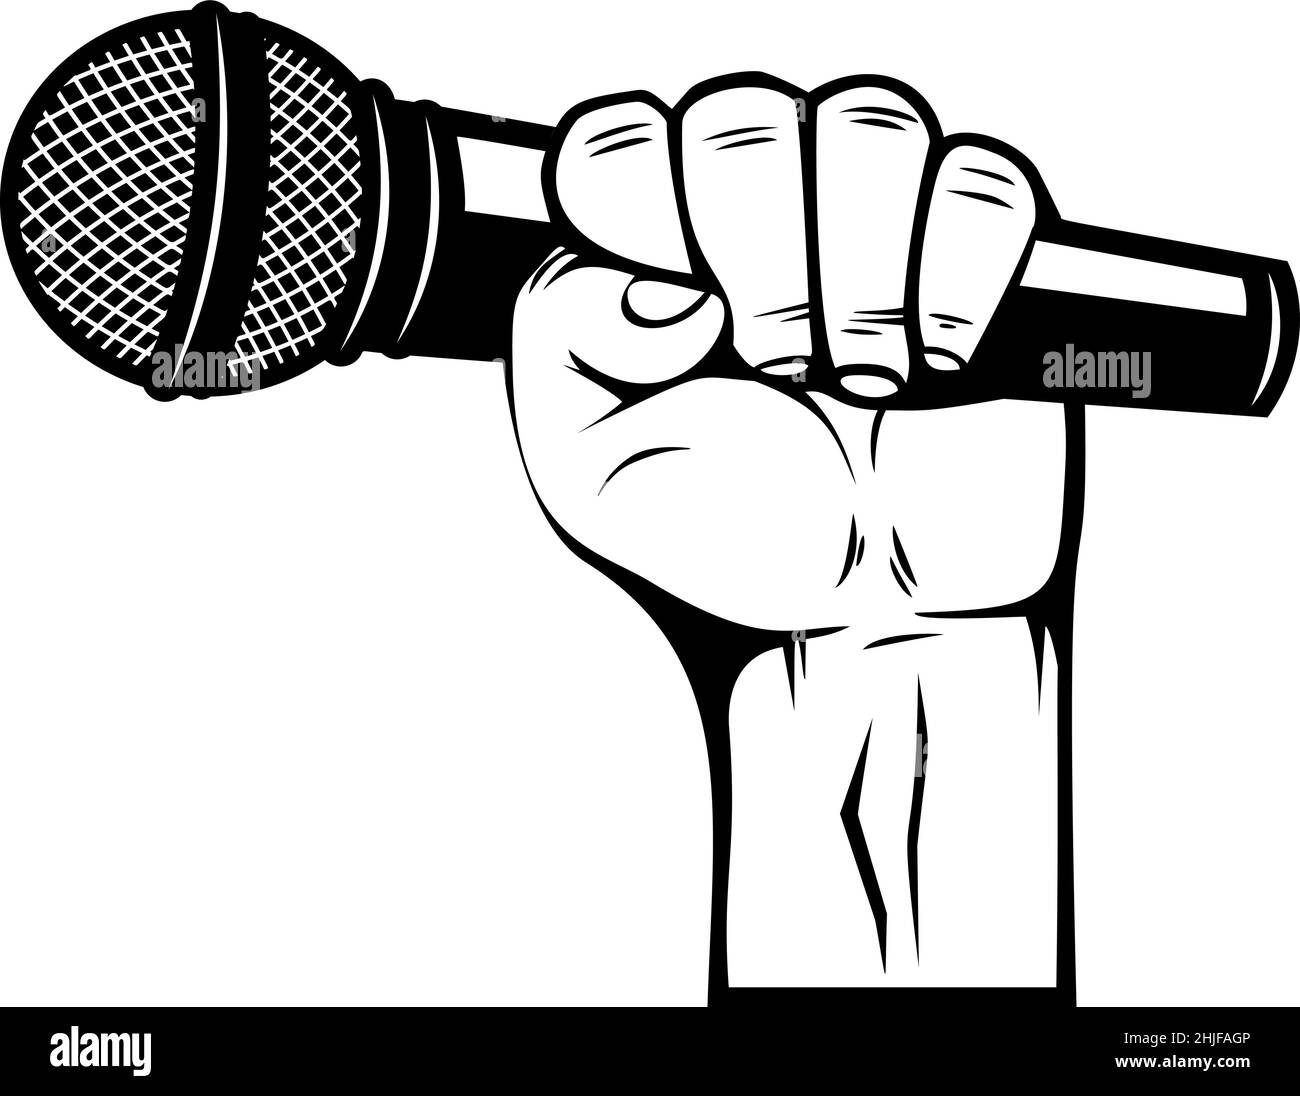 The human voice poster Black and White Stock Photos & Images - Alamy